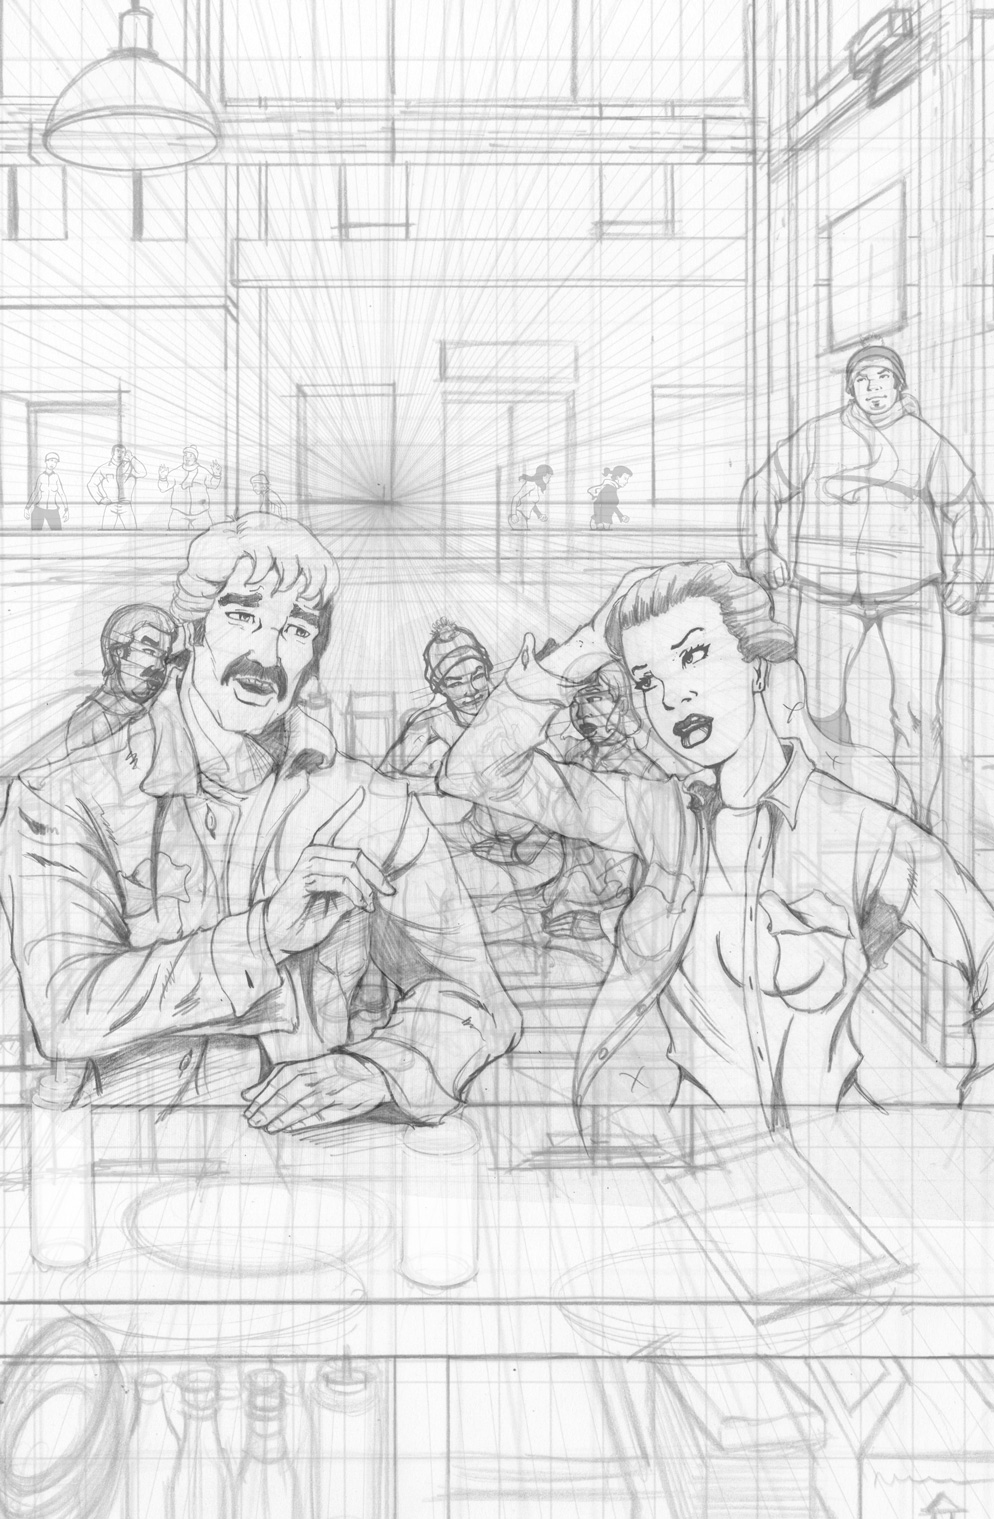 WOLF'S HEAD issue 18 Page 1 Tight Pencils illustrated by Von Allan